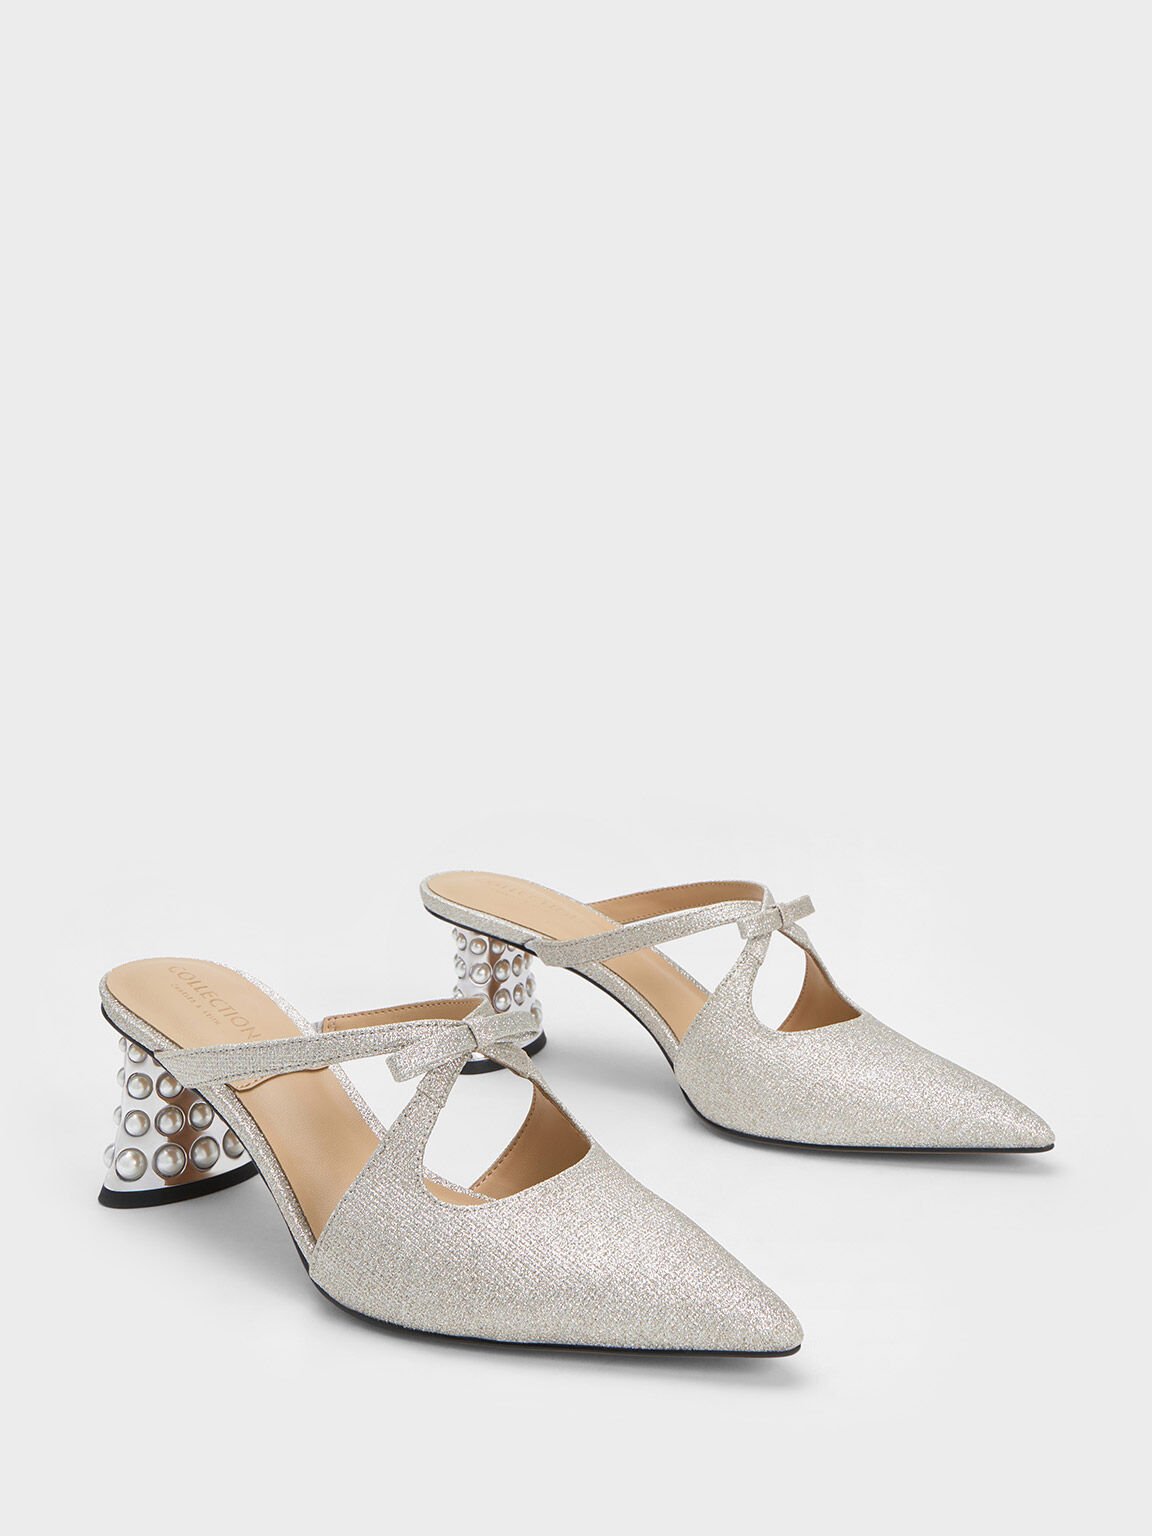 Beaded Heel Glittered Bow Mules, Silver, hi-res